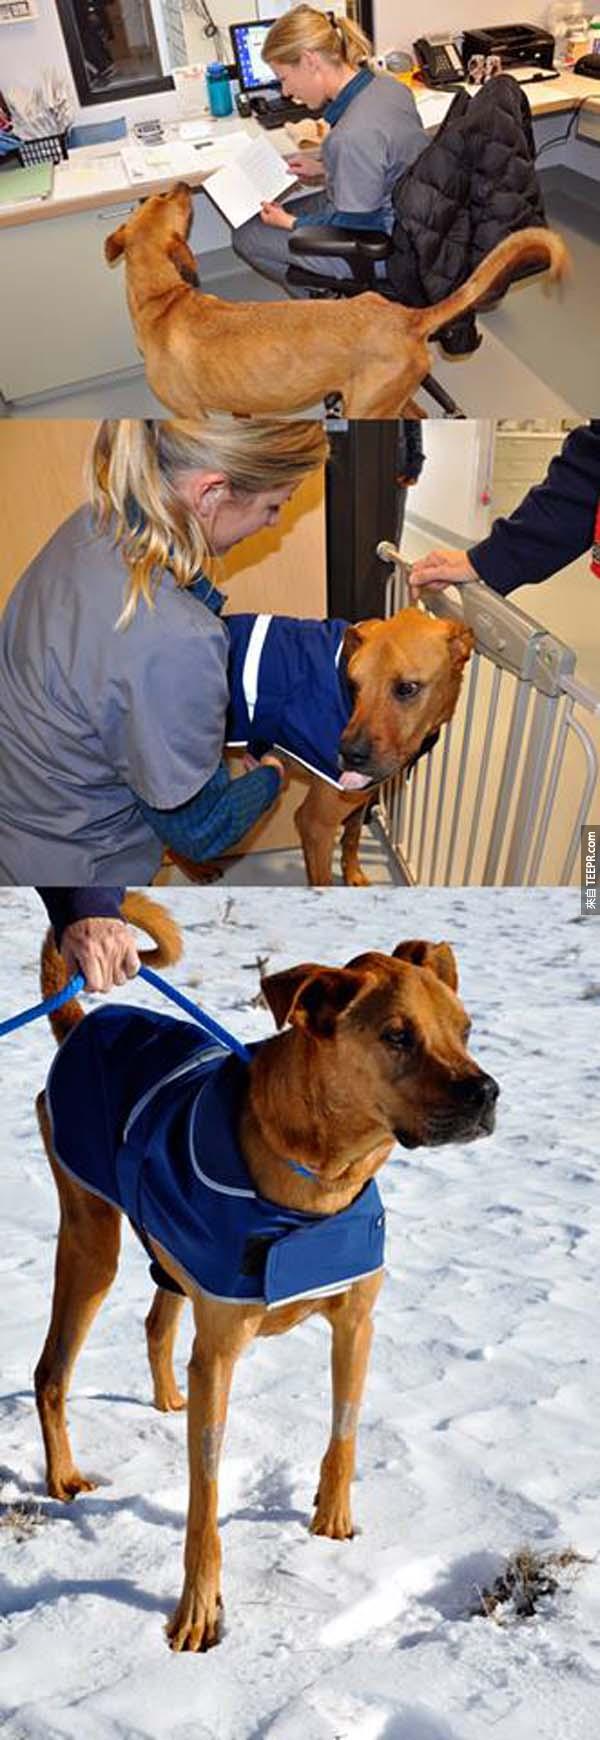 Once he gained a little weight, the dog was taken in by a foster family who had one goal: to fatten that pooch up!